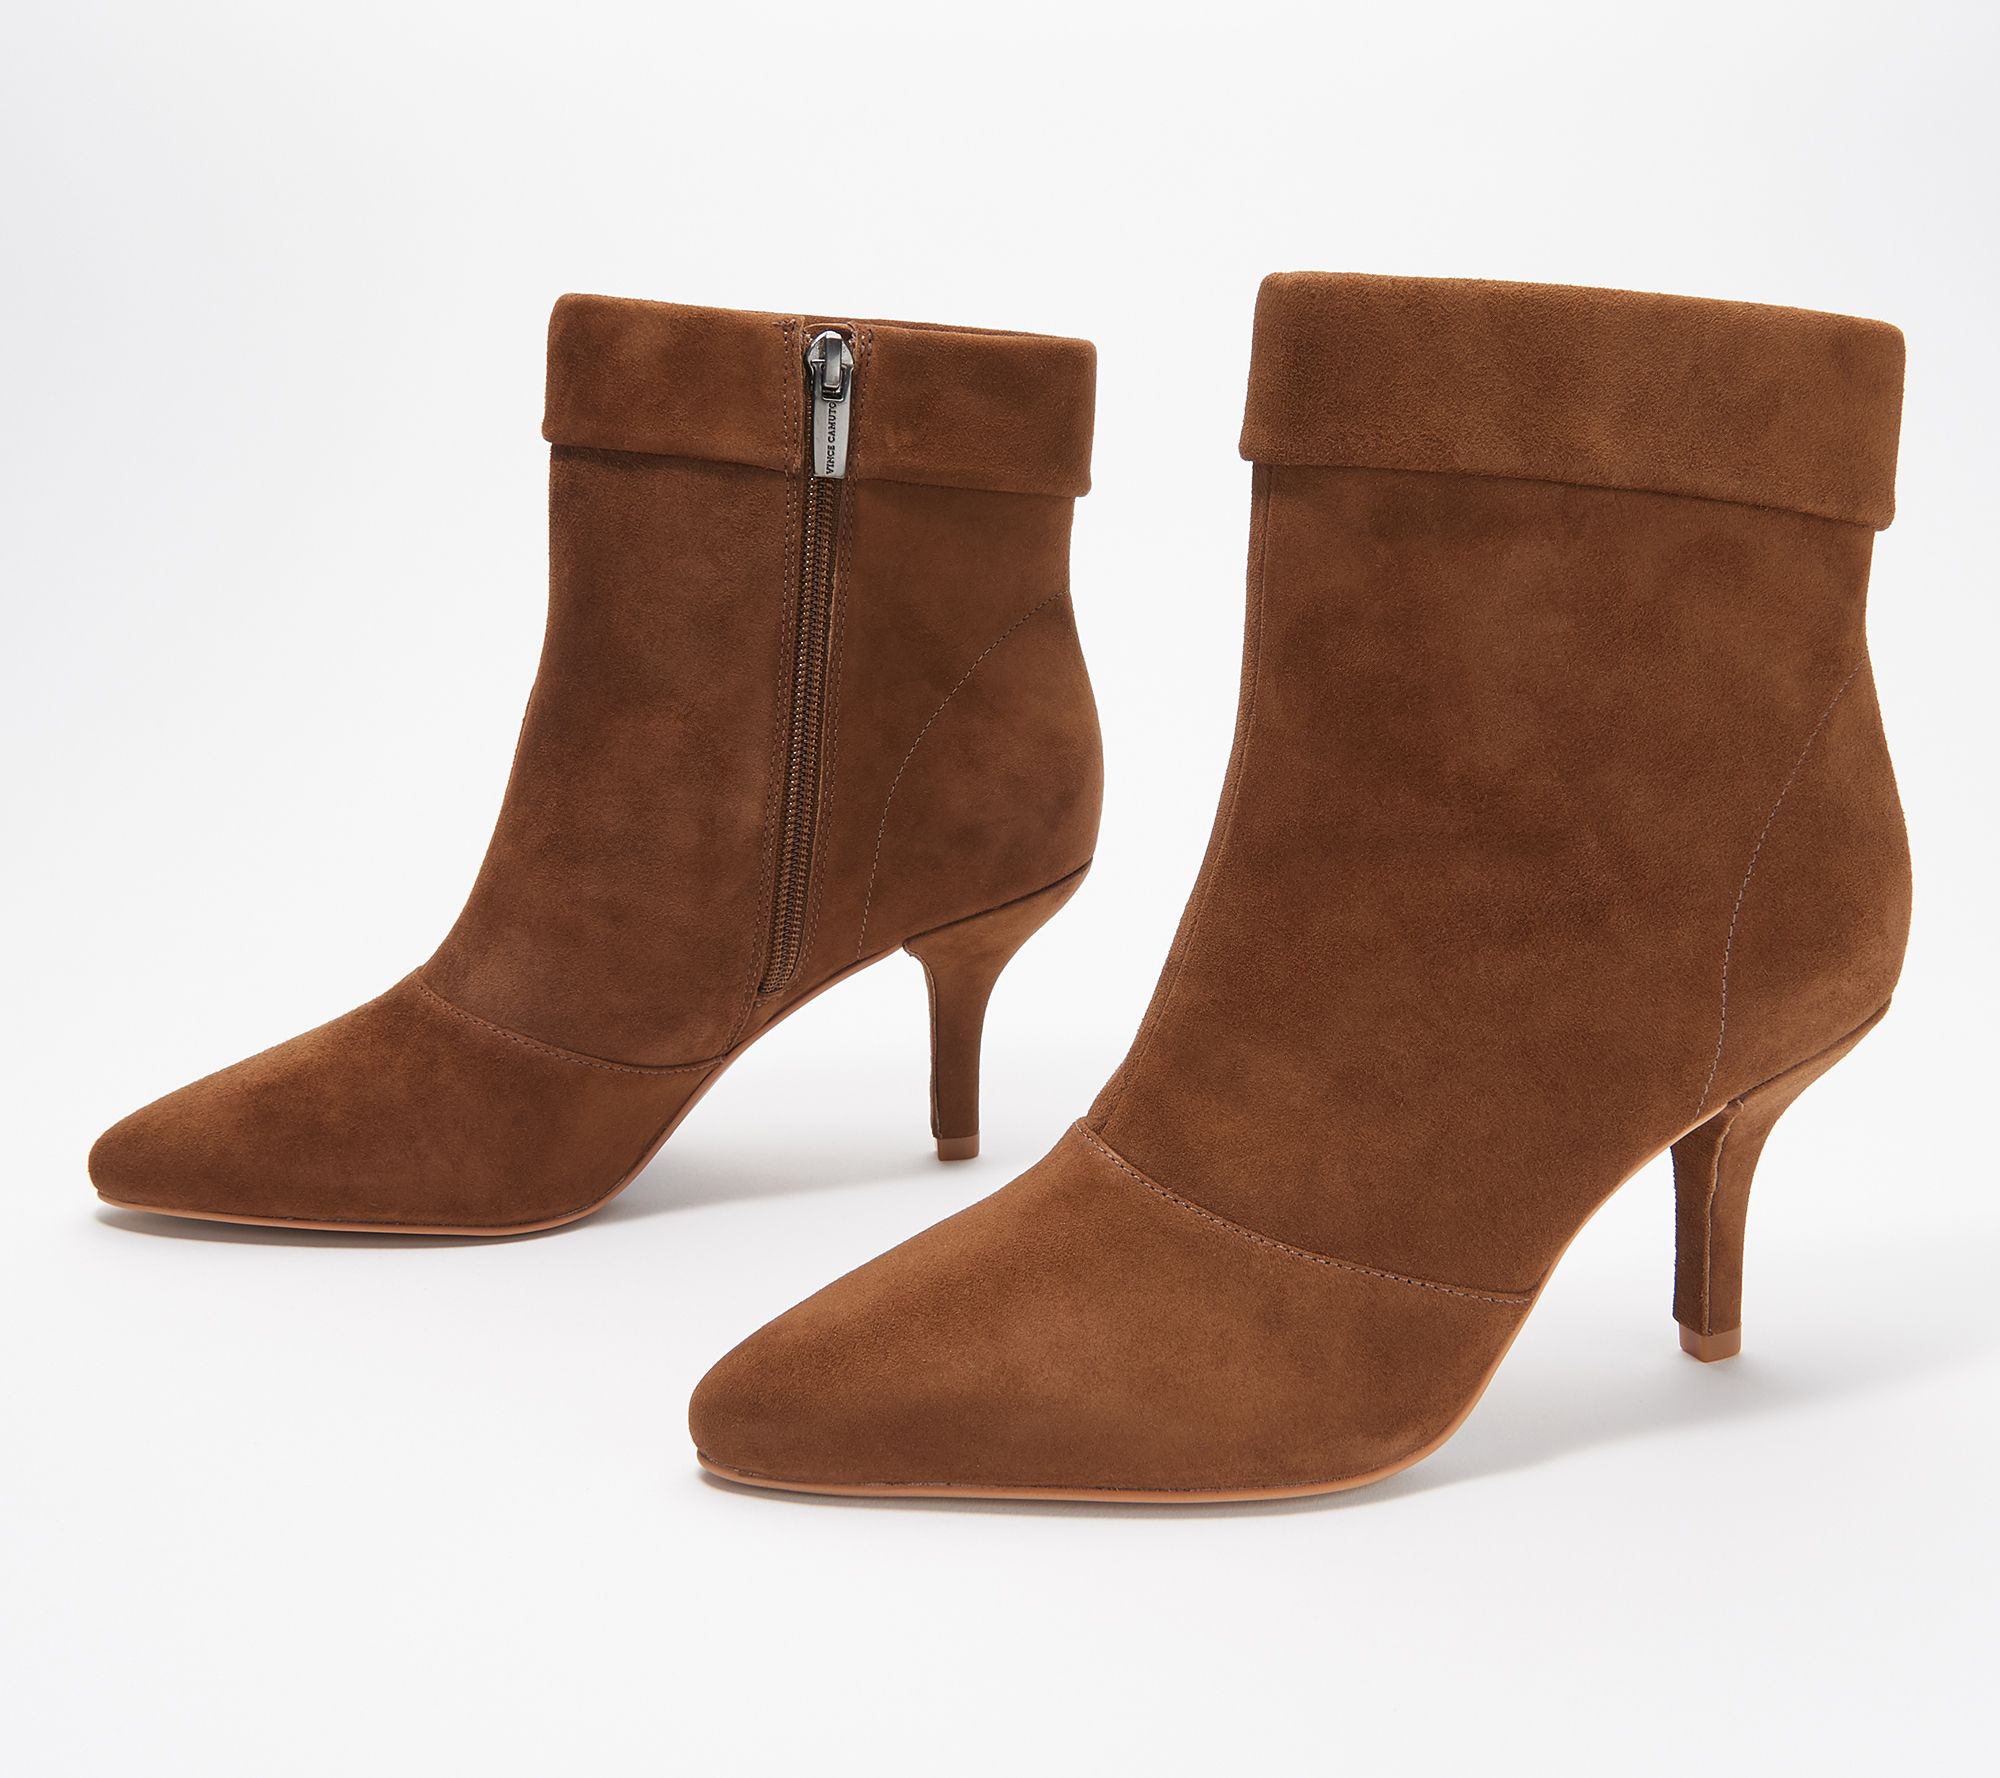 Vince Camuto Leather or Suede Ankle Boots - Amvita - QVC.com